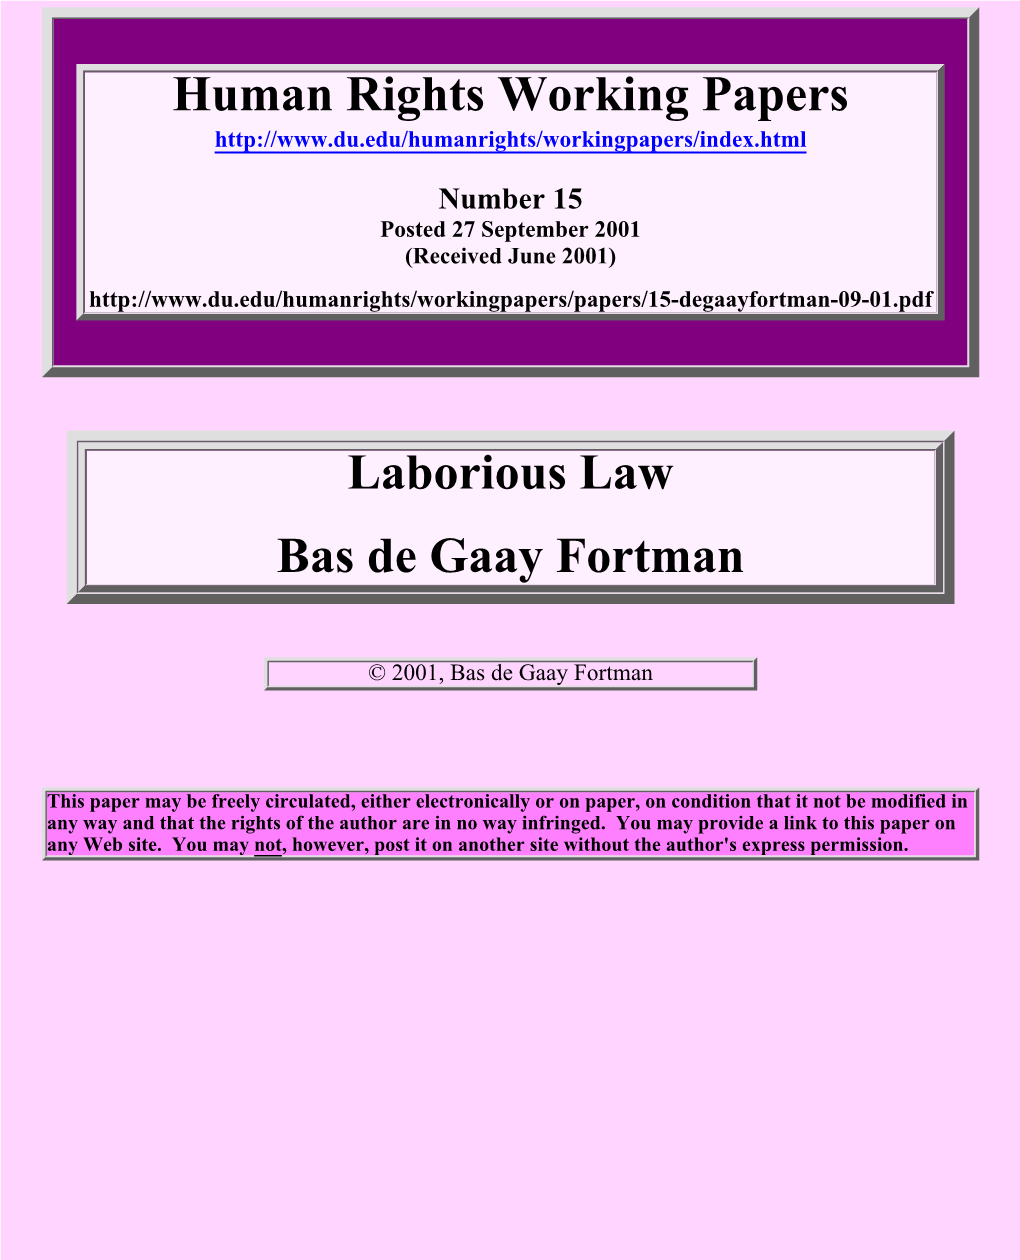 Human Rights Working Papers Laborious Law Bas De Gaay Fortman